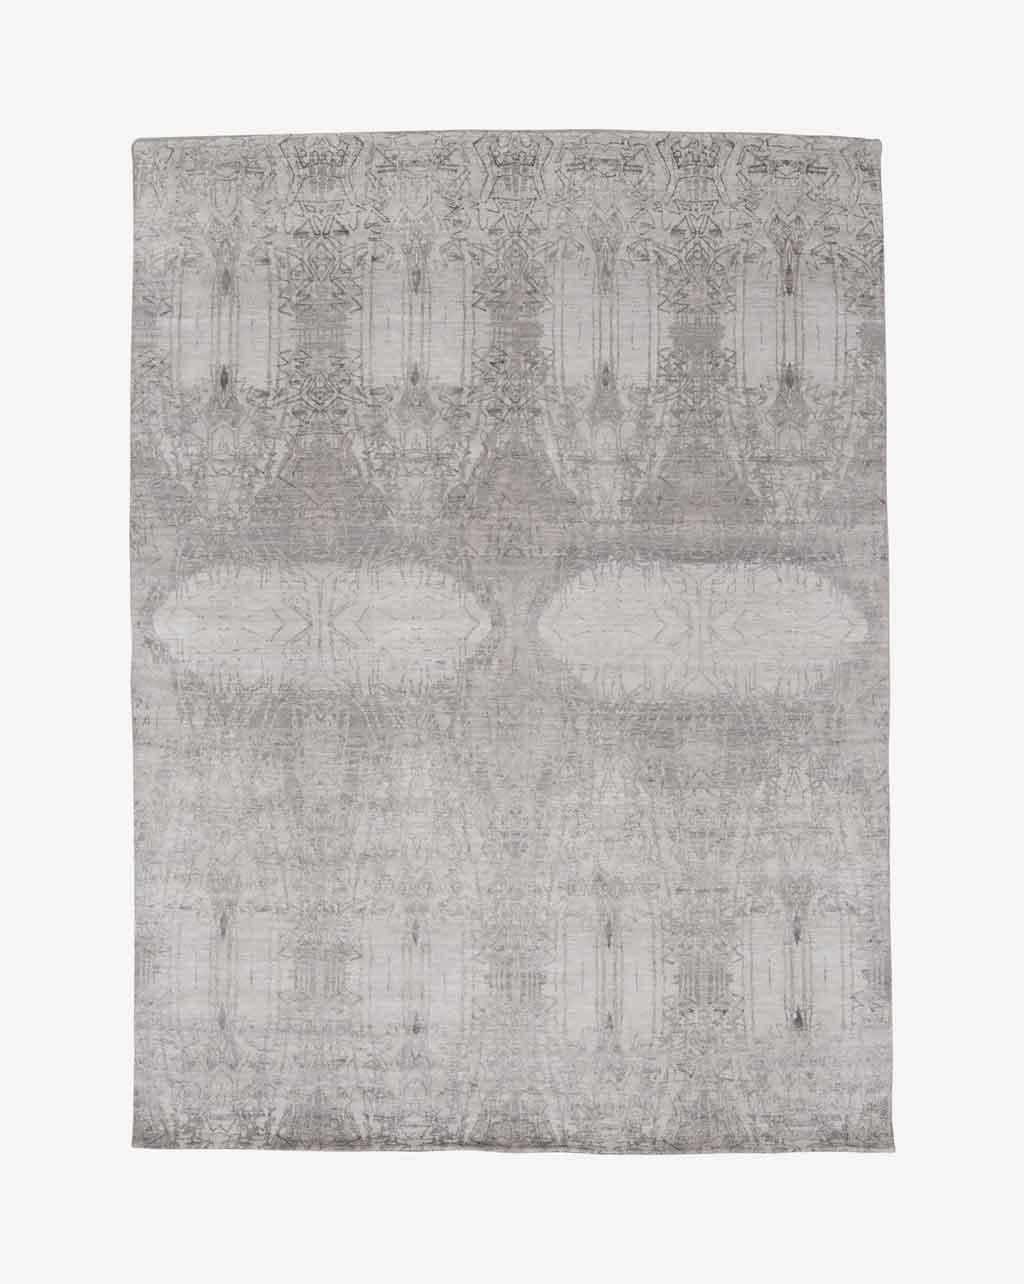 A Akimbo 1 Persian Knot Rug 10' x 14' Greyscale with an abstract geometric design on it